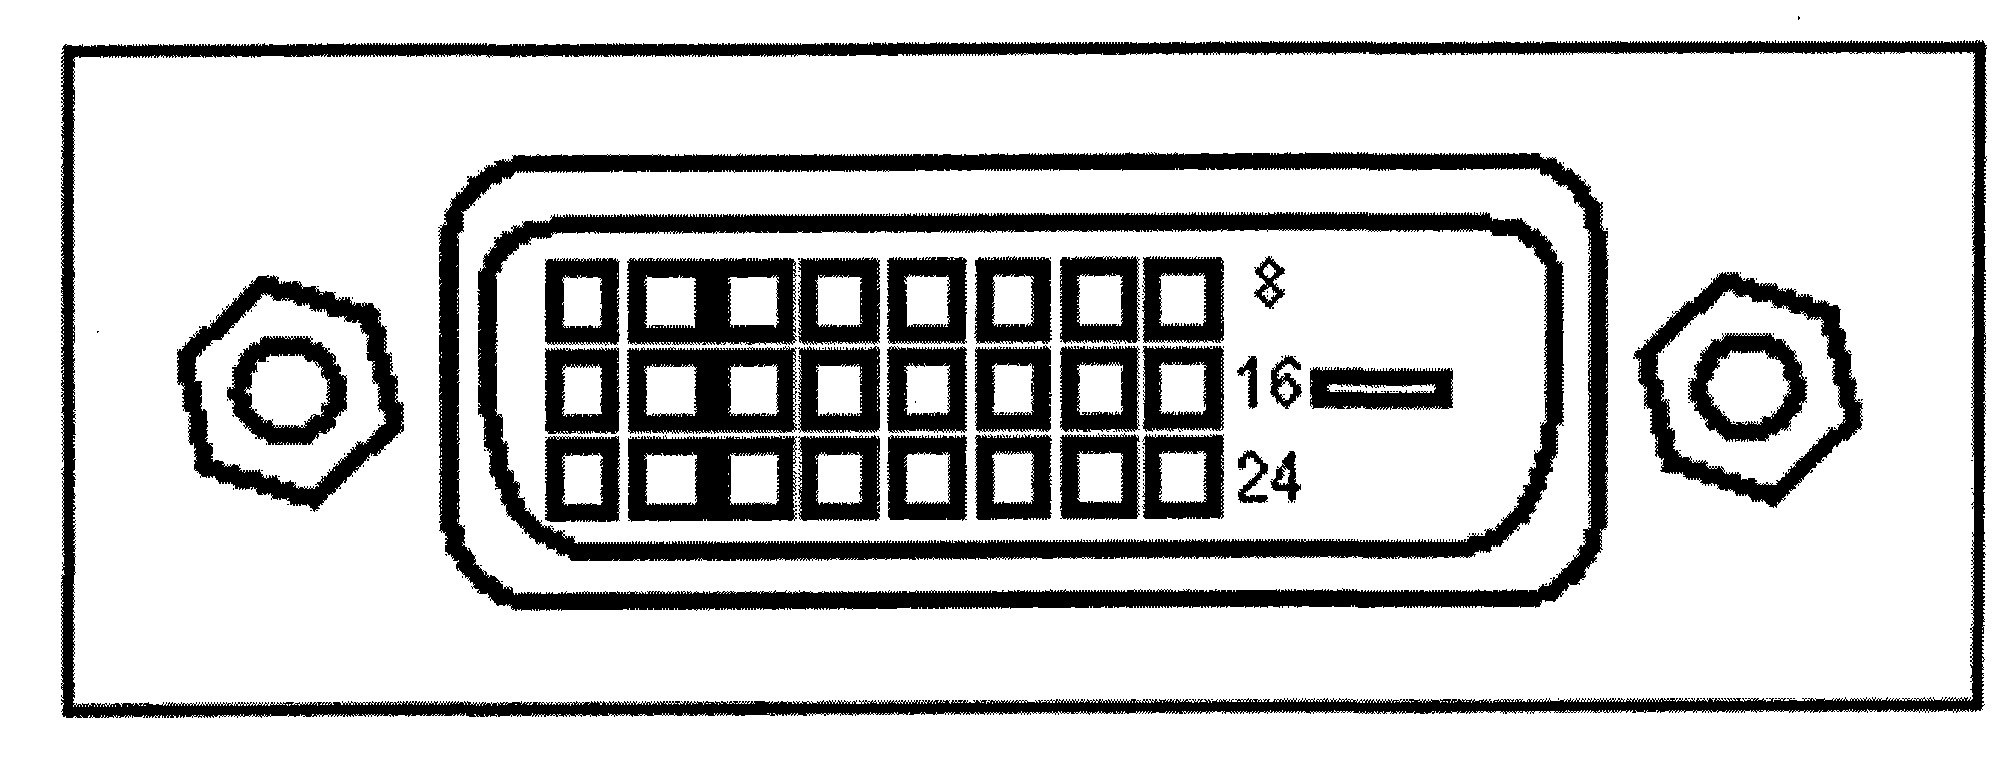 Display, method for controlling power supply thereof and computer